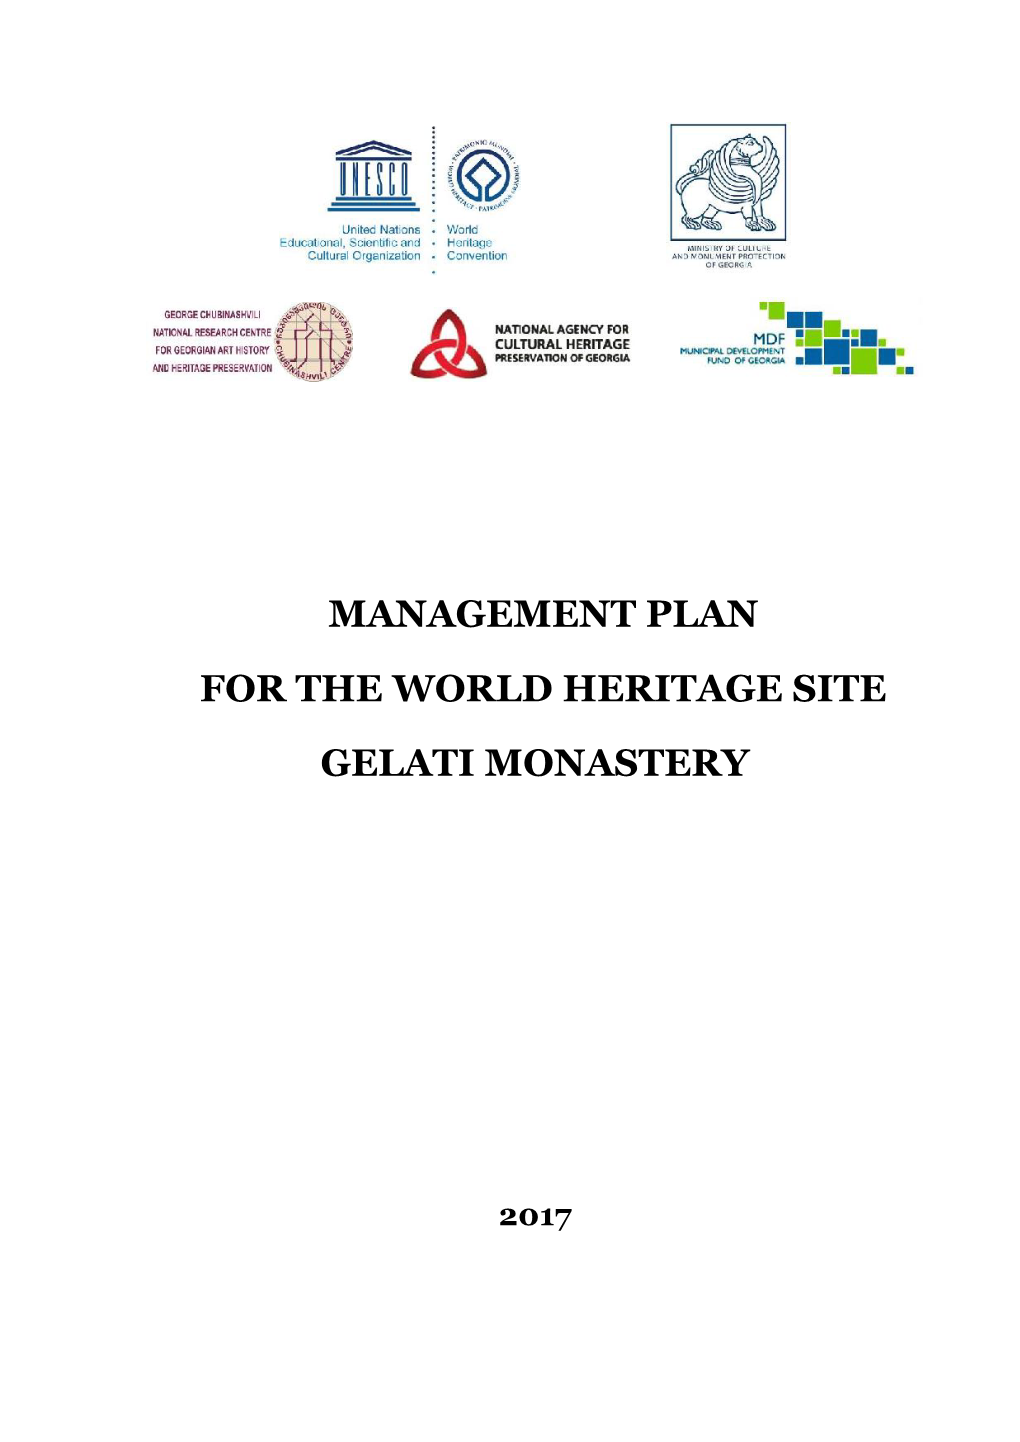 Management Plan for the World Heritage Site Gelati Monastery